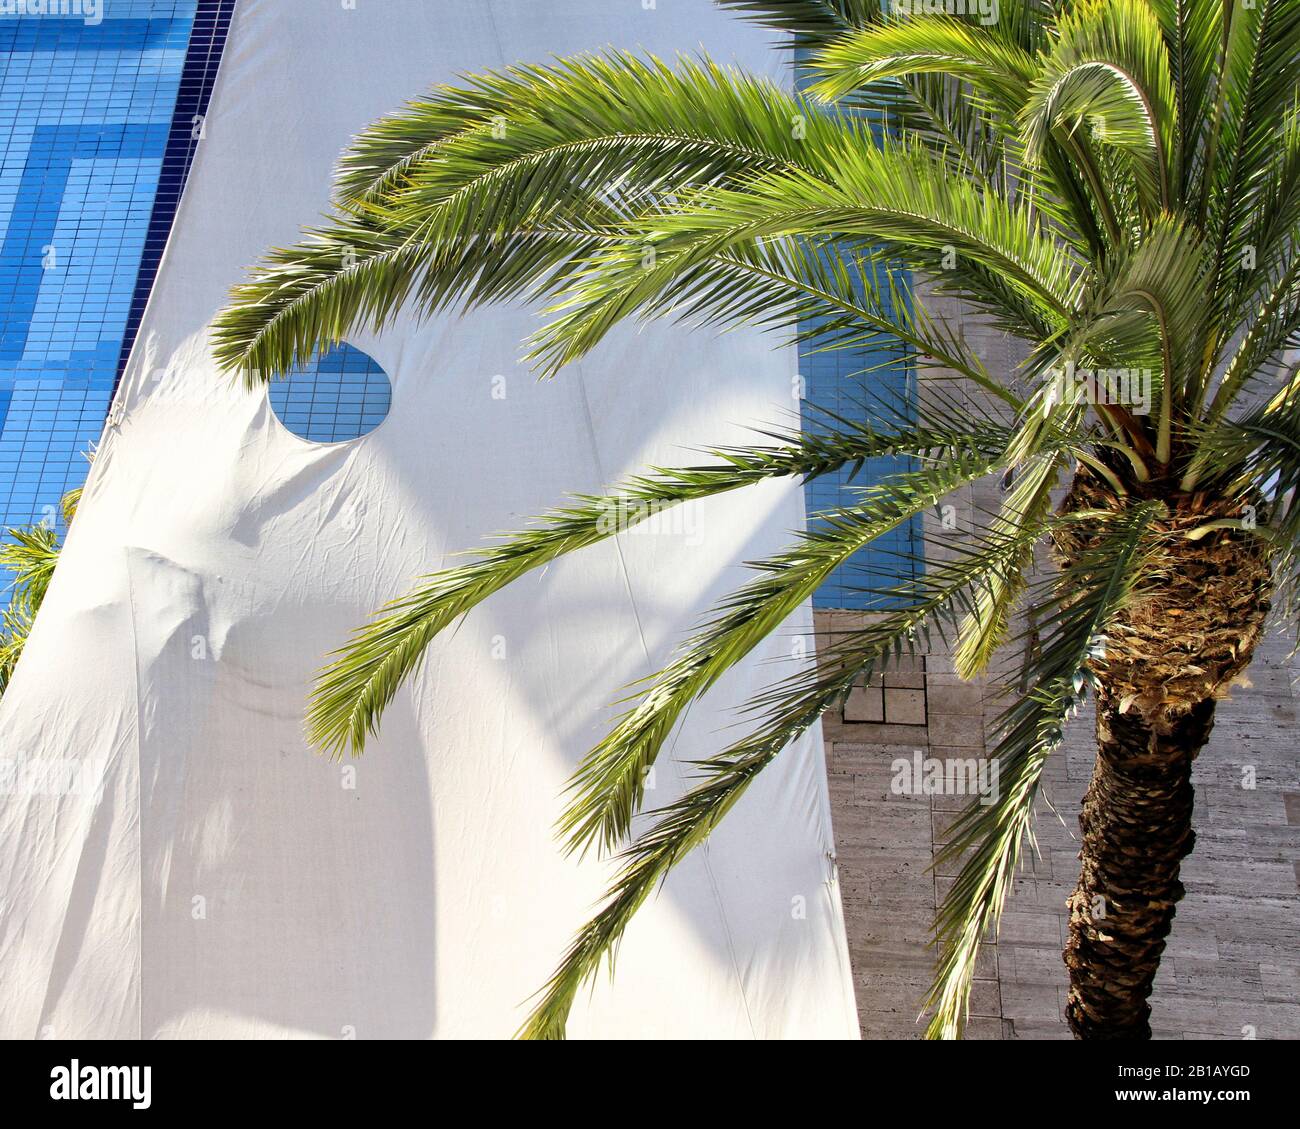 A close up view from above of part of a swimming pool with a white canopy stretched over it and a palm tree next to it. Stock Photo